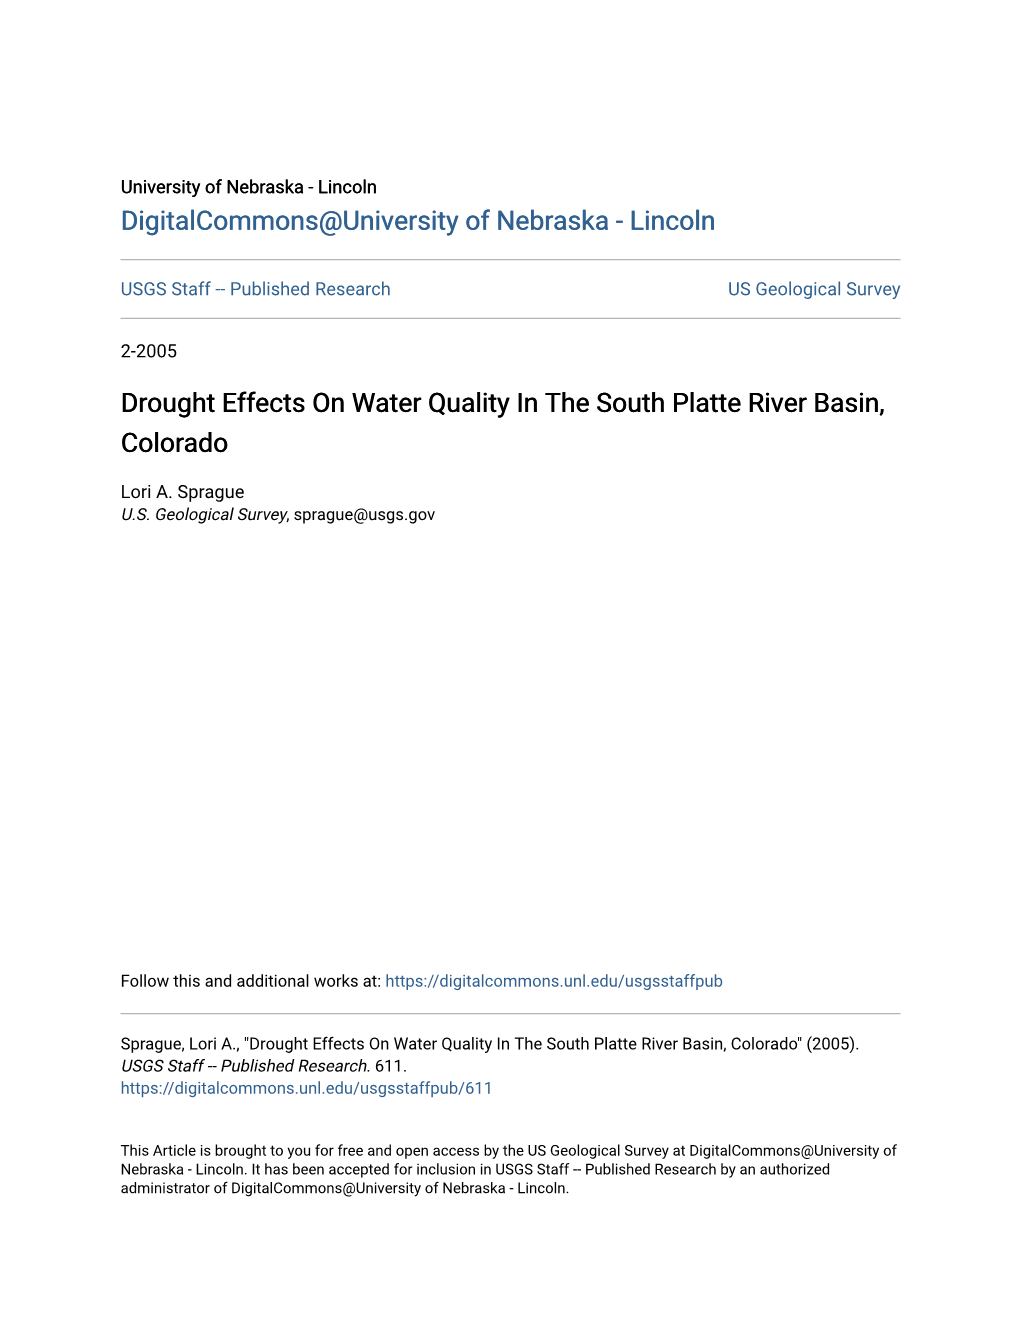 Drought Effects on Water Quality in the South Platte River Basin, Colorado